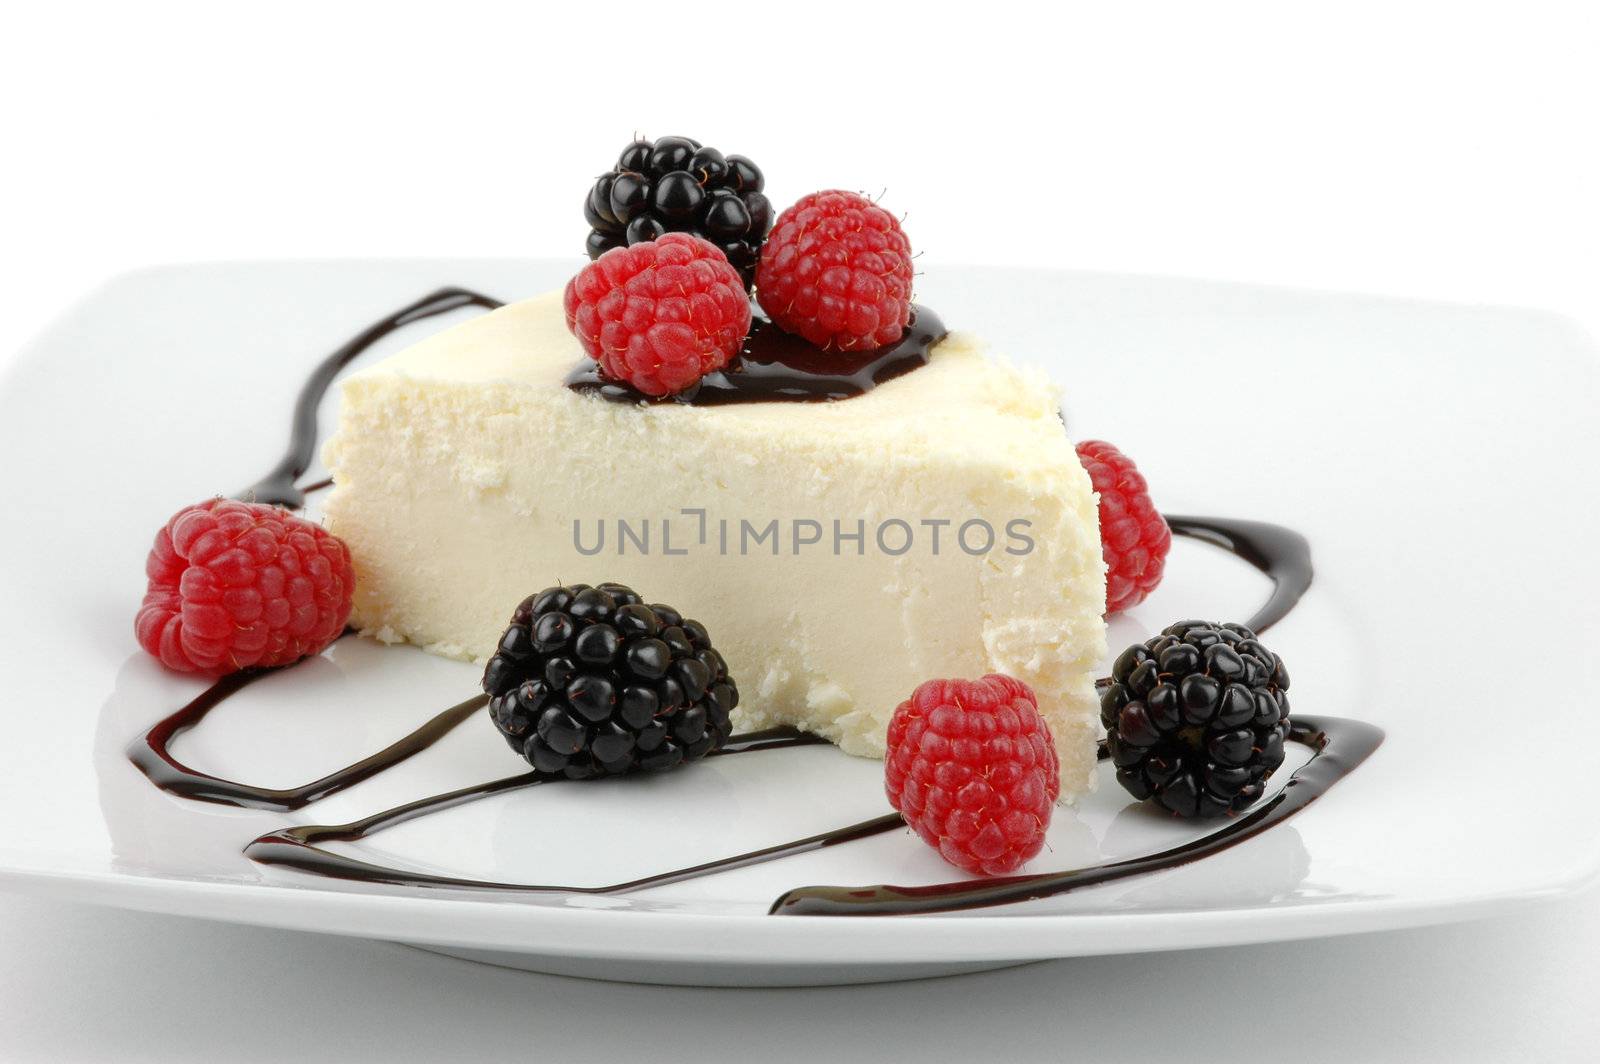 Creamy traditional cheesecake with berries and chocolate sauce.